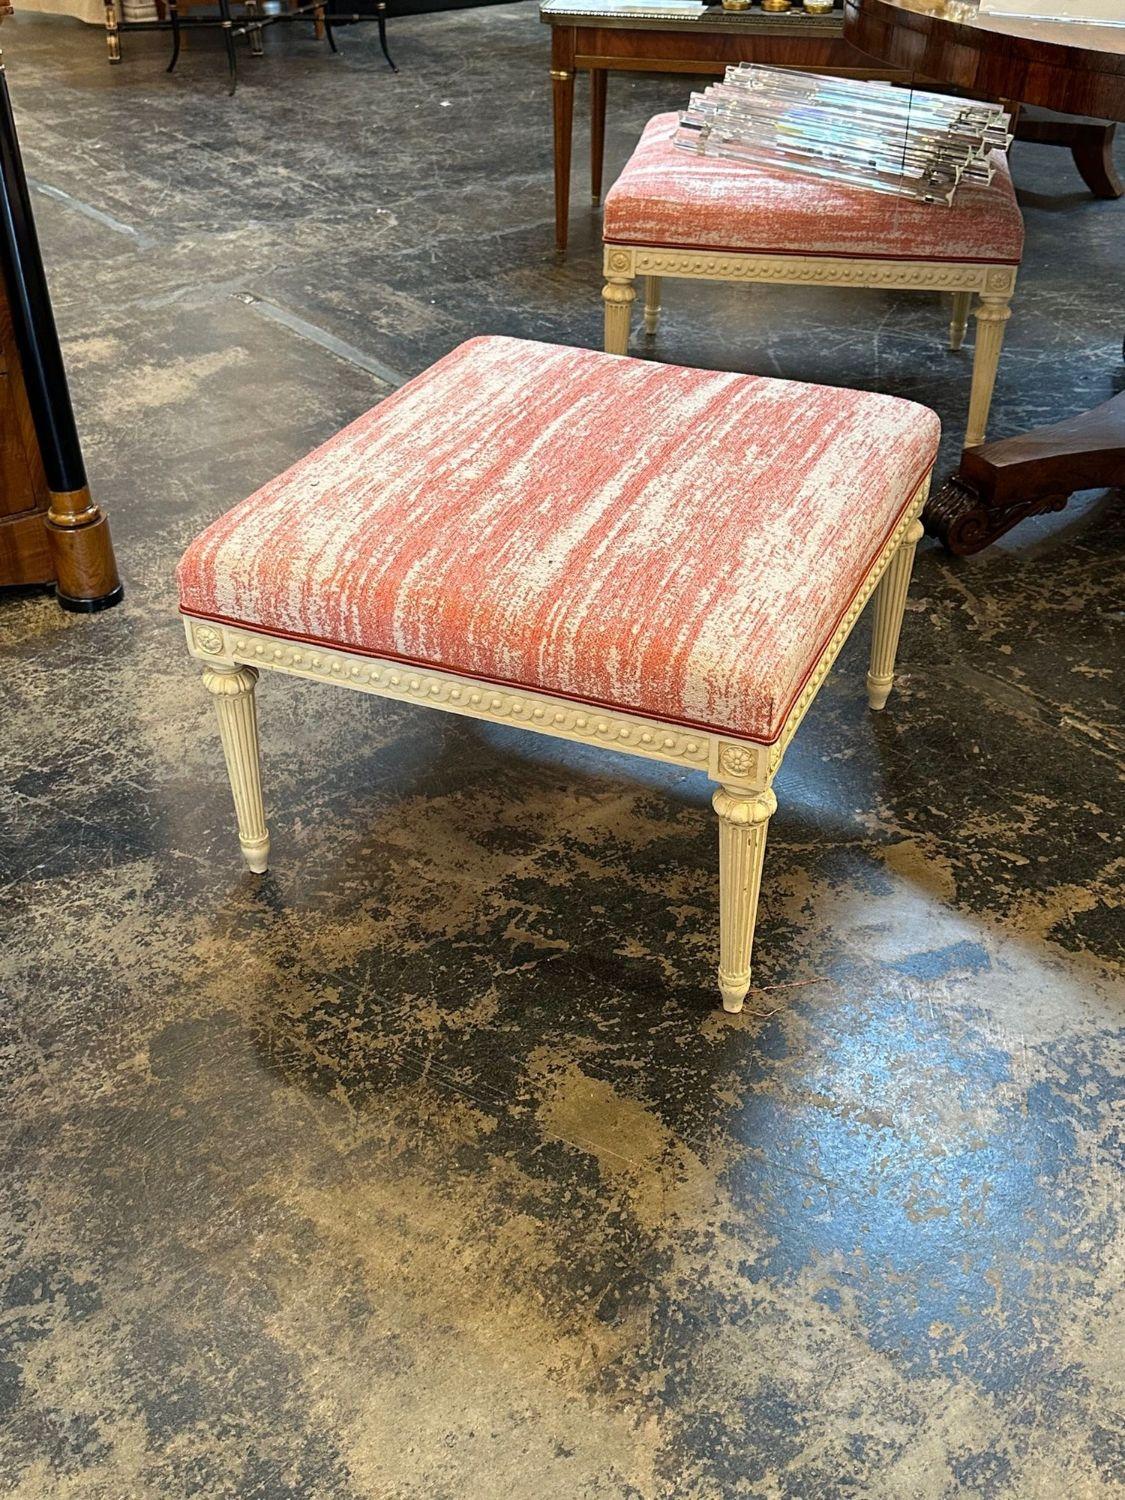 Vintage French Louis XVI style carved and painted ottoman. Circa 1940. Perfect for today's transitional designs!